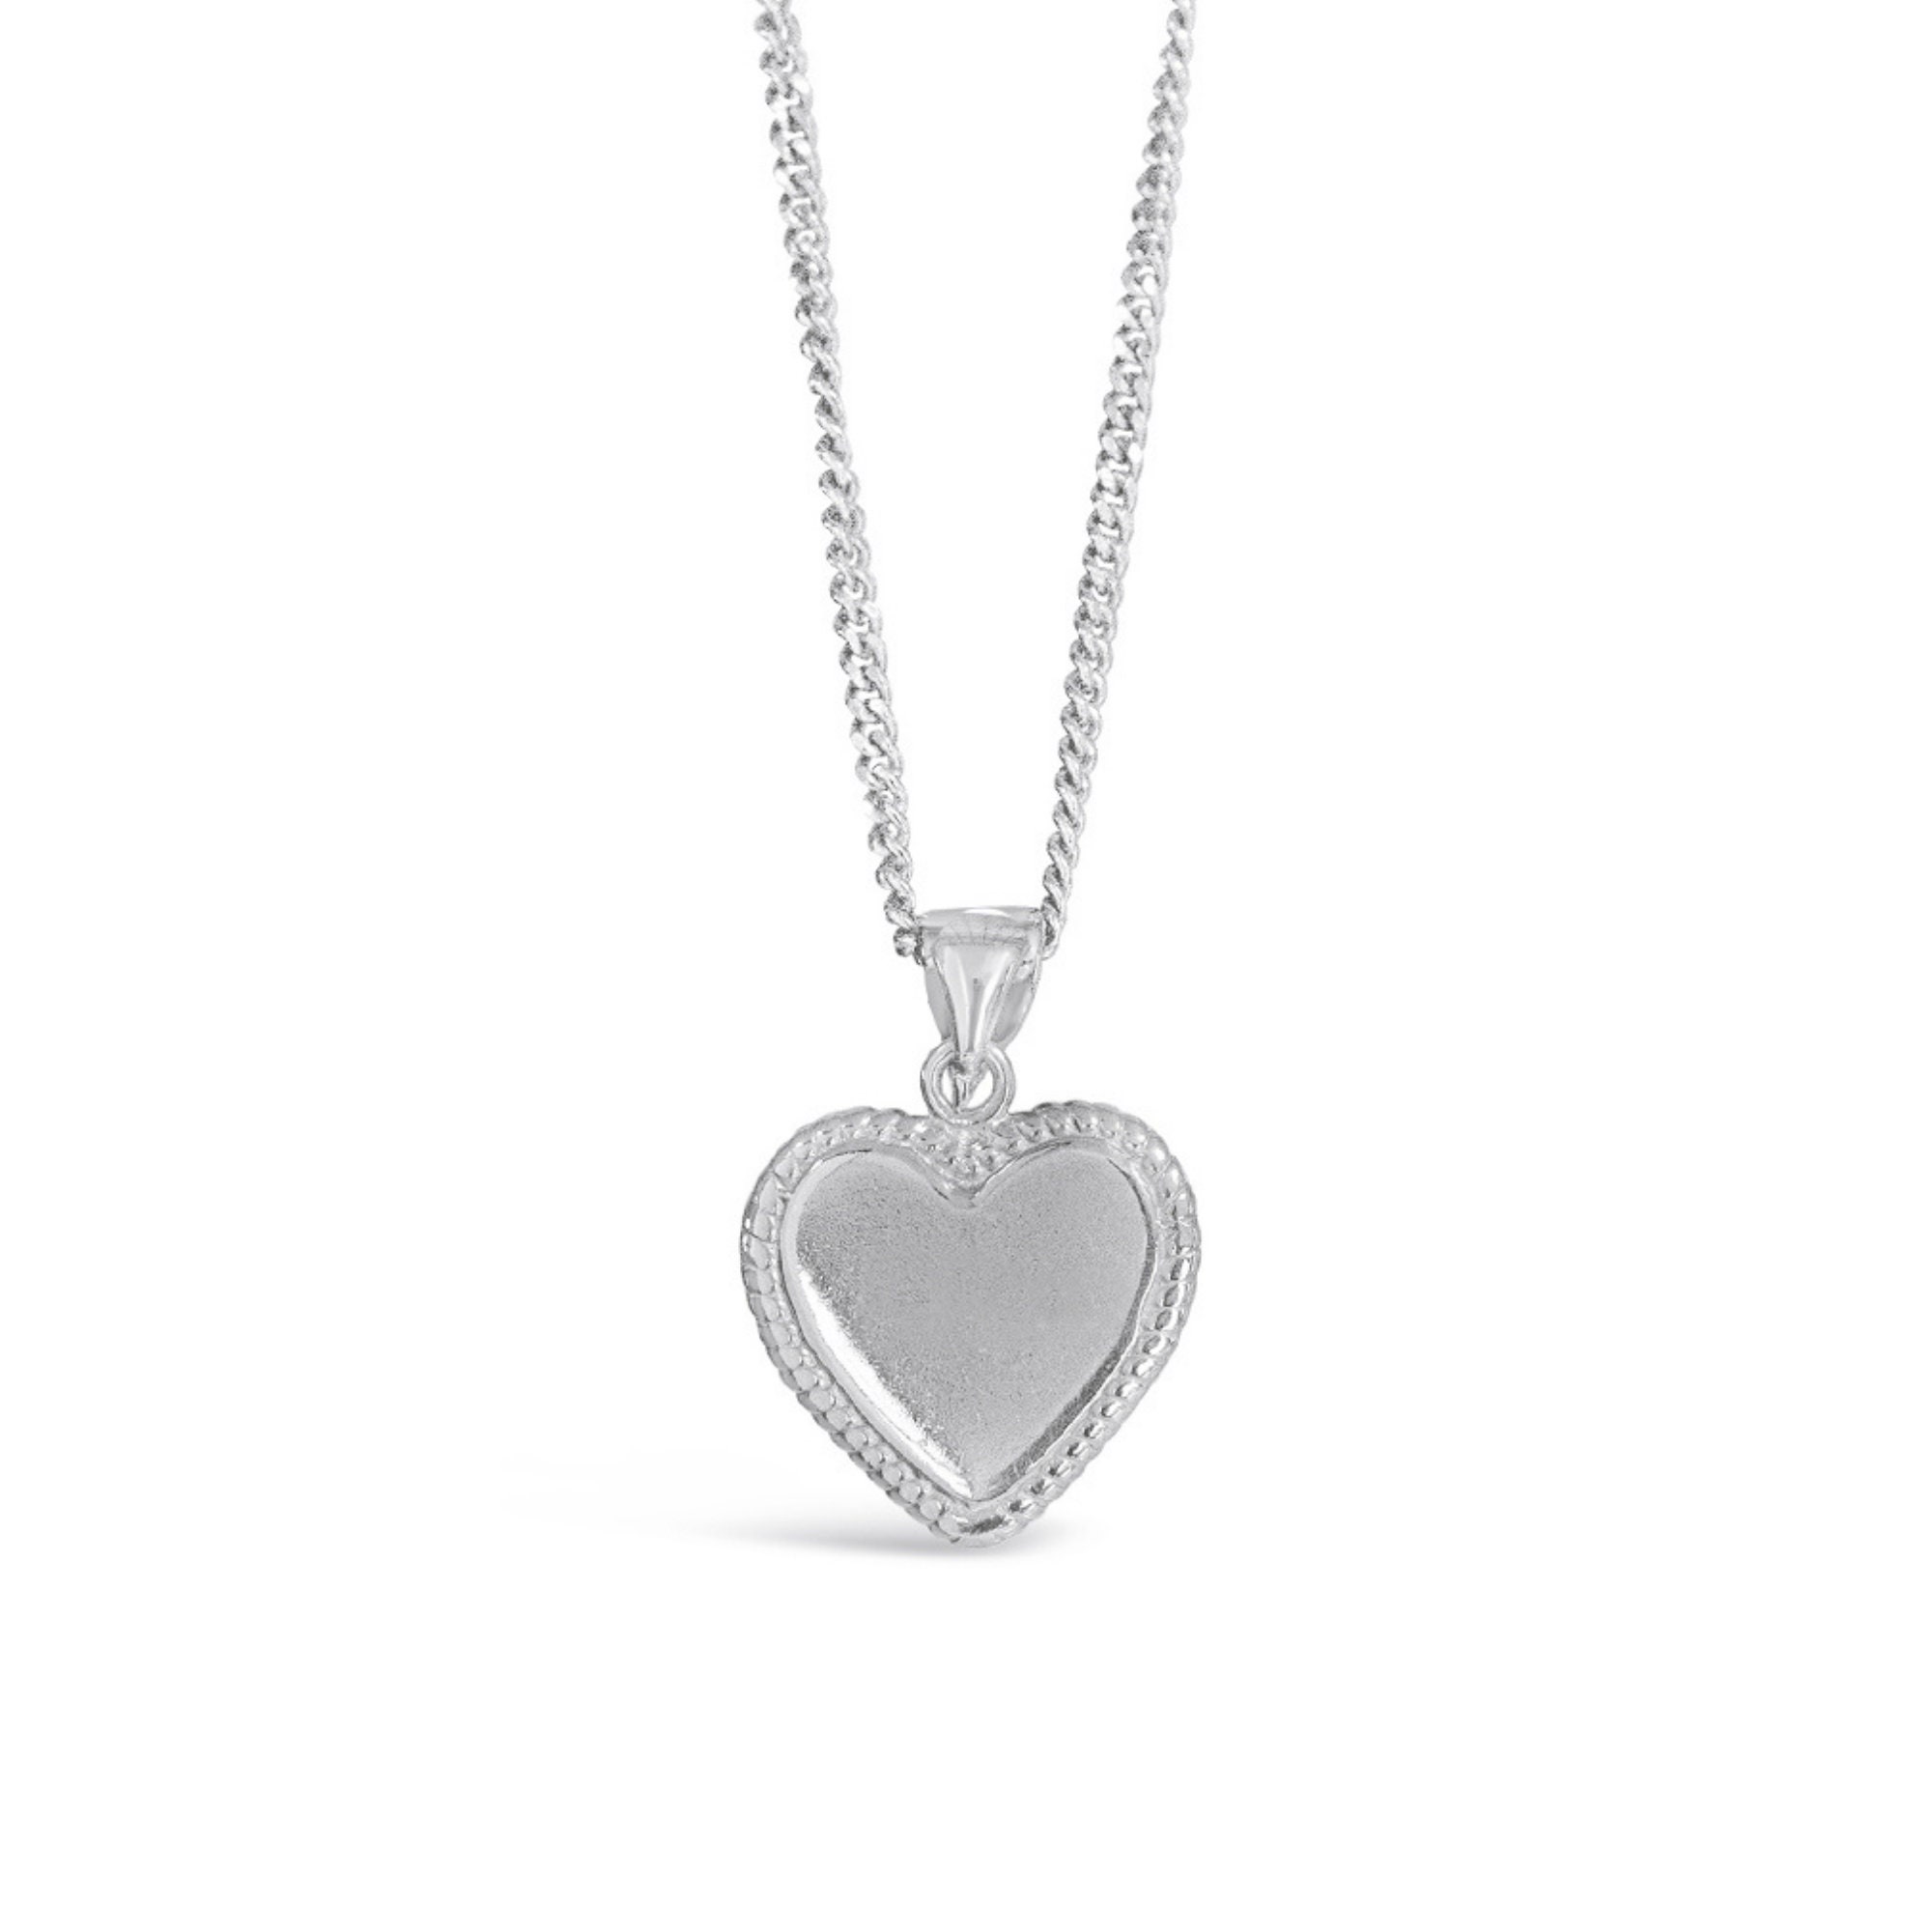 Heart pendant charms*sterling silver 925*CHARMS - ELEMENT ENGRAVE 4 22,5x32  mm - SILVEXCRAFT